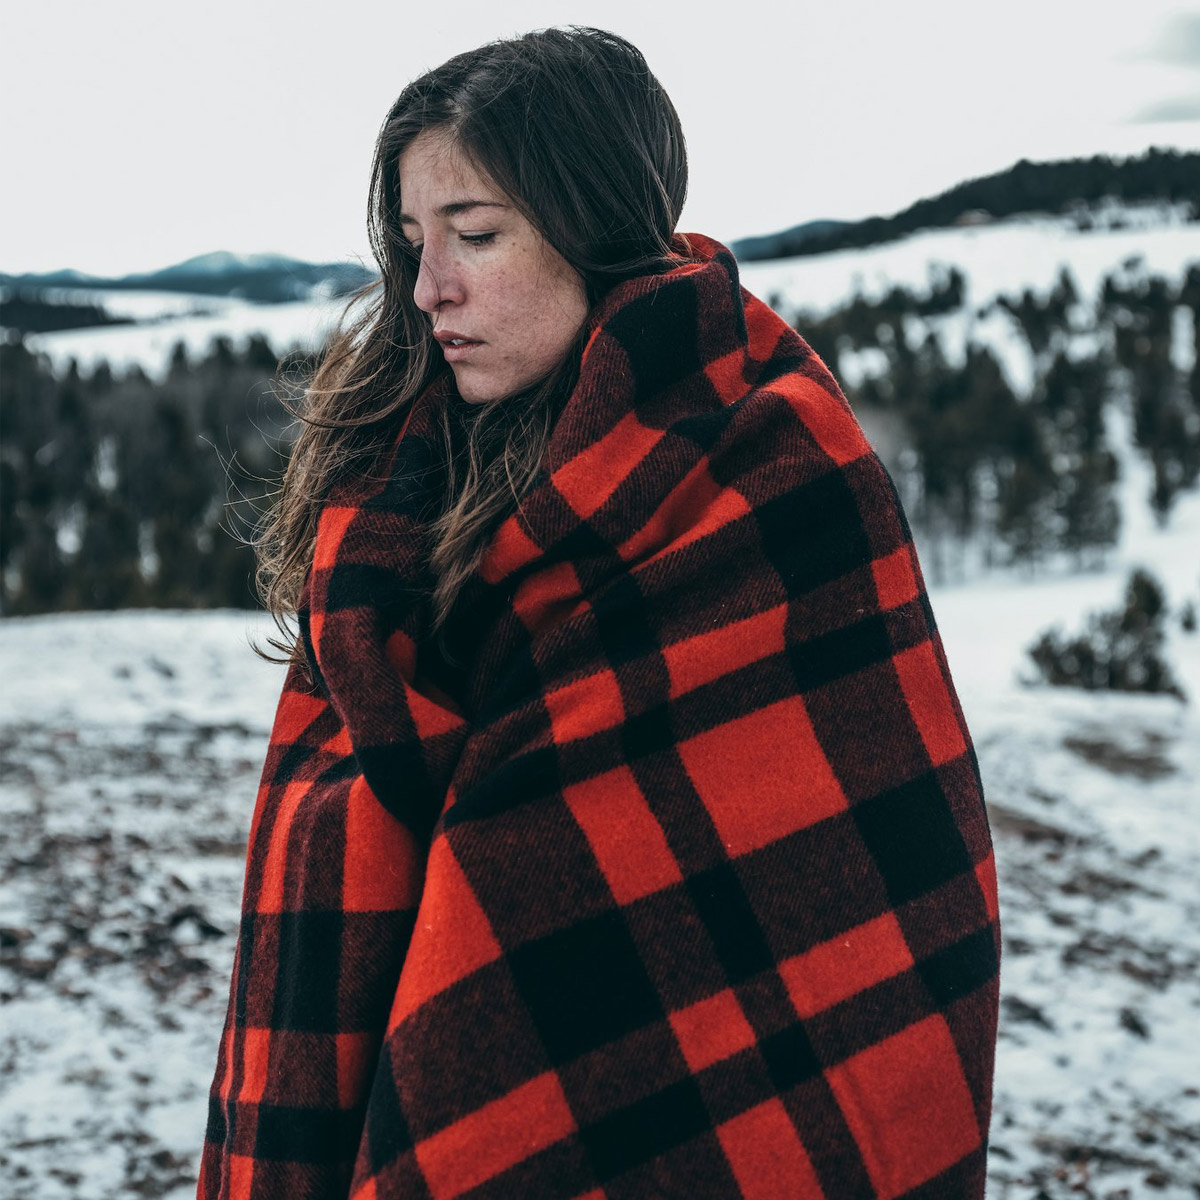 Filson Mackinaw Wool Blanket 11080110-Red Black, keeps you warm in any weather